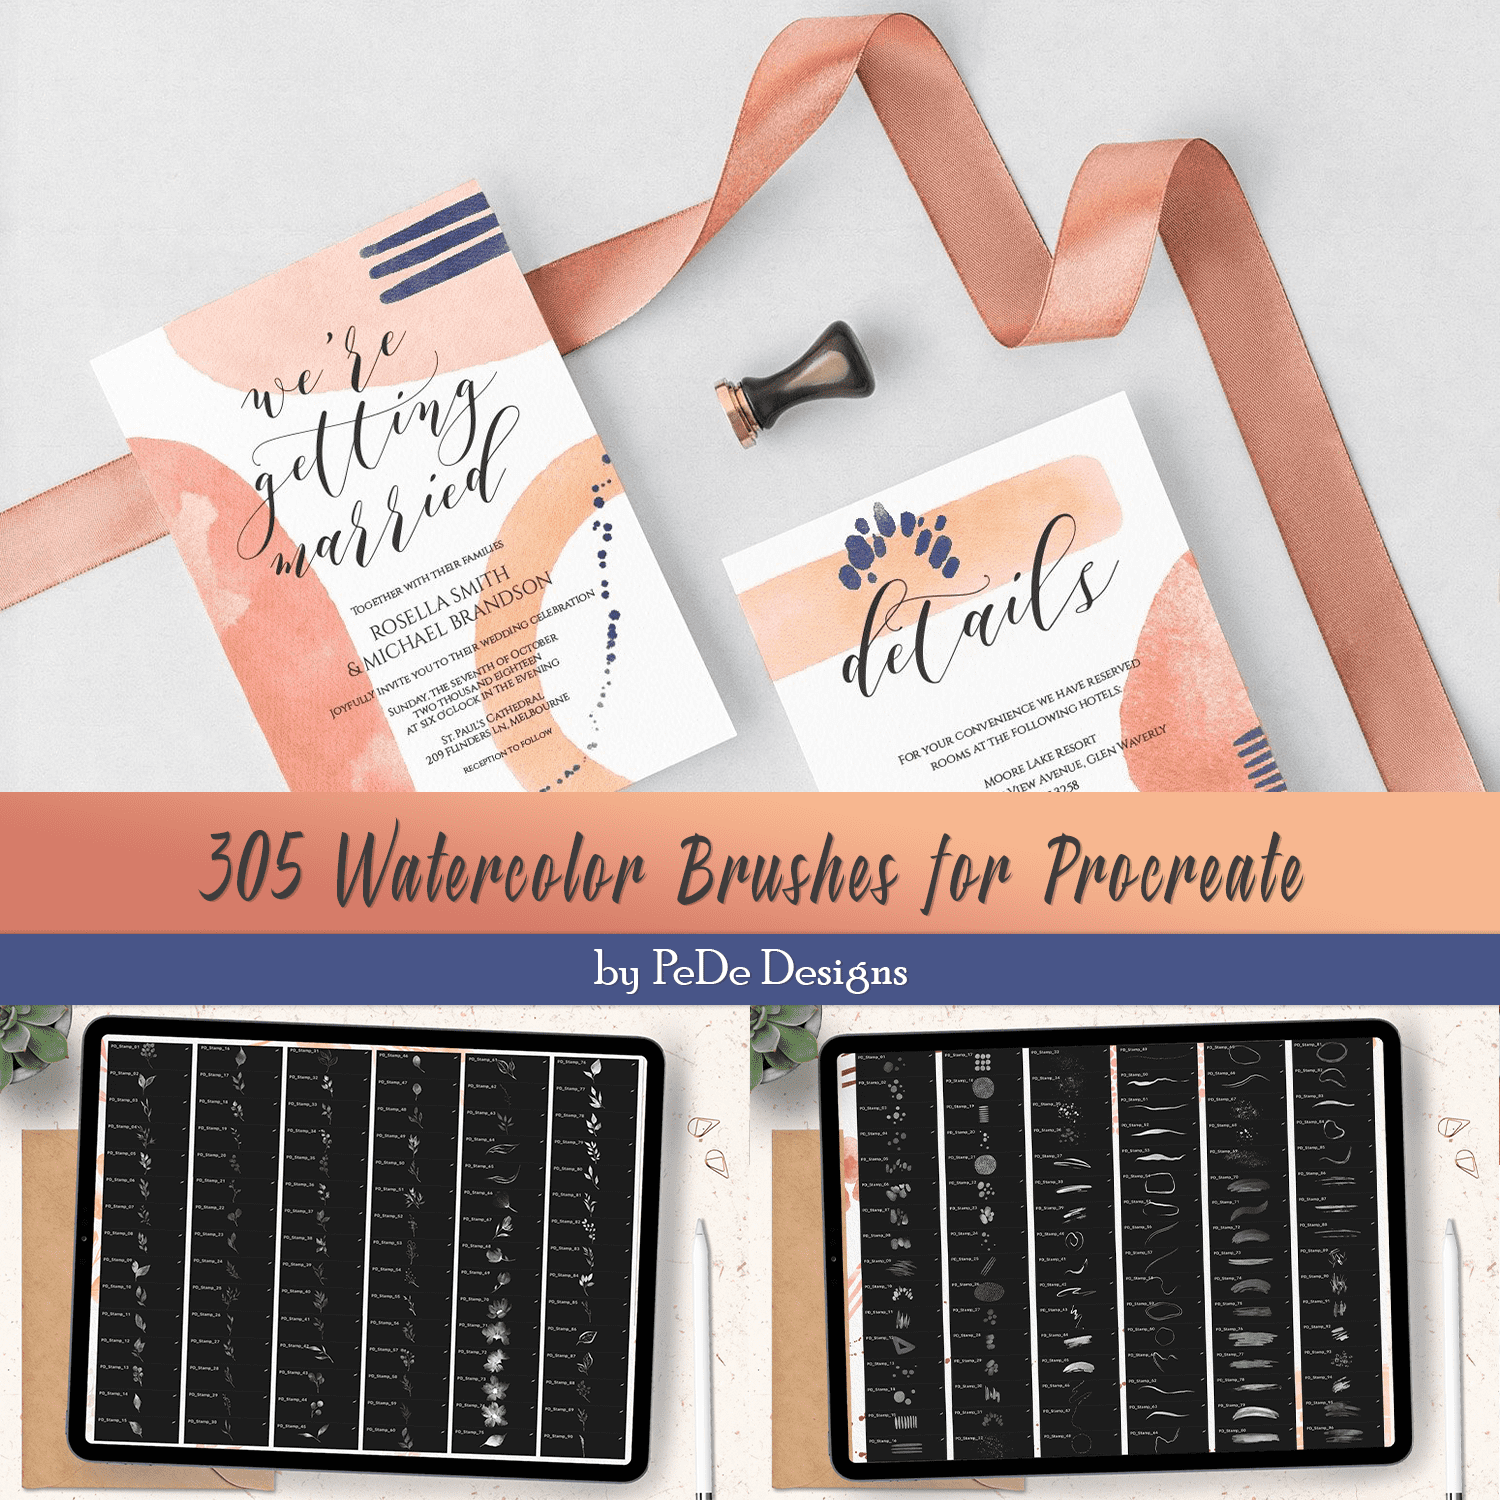 305 Watercolor Brushes For Procreate Cover.